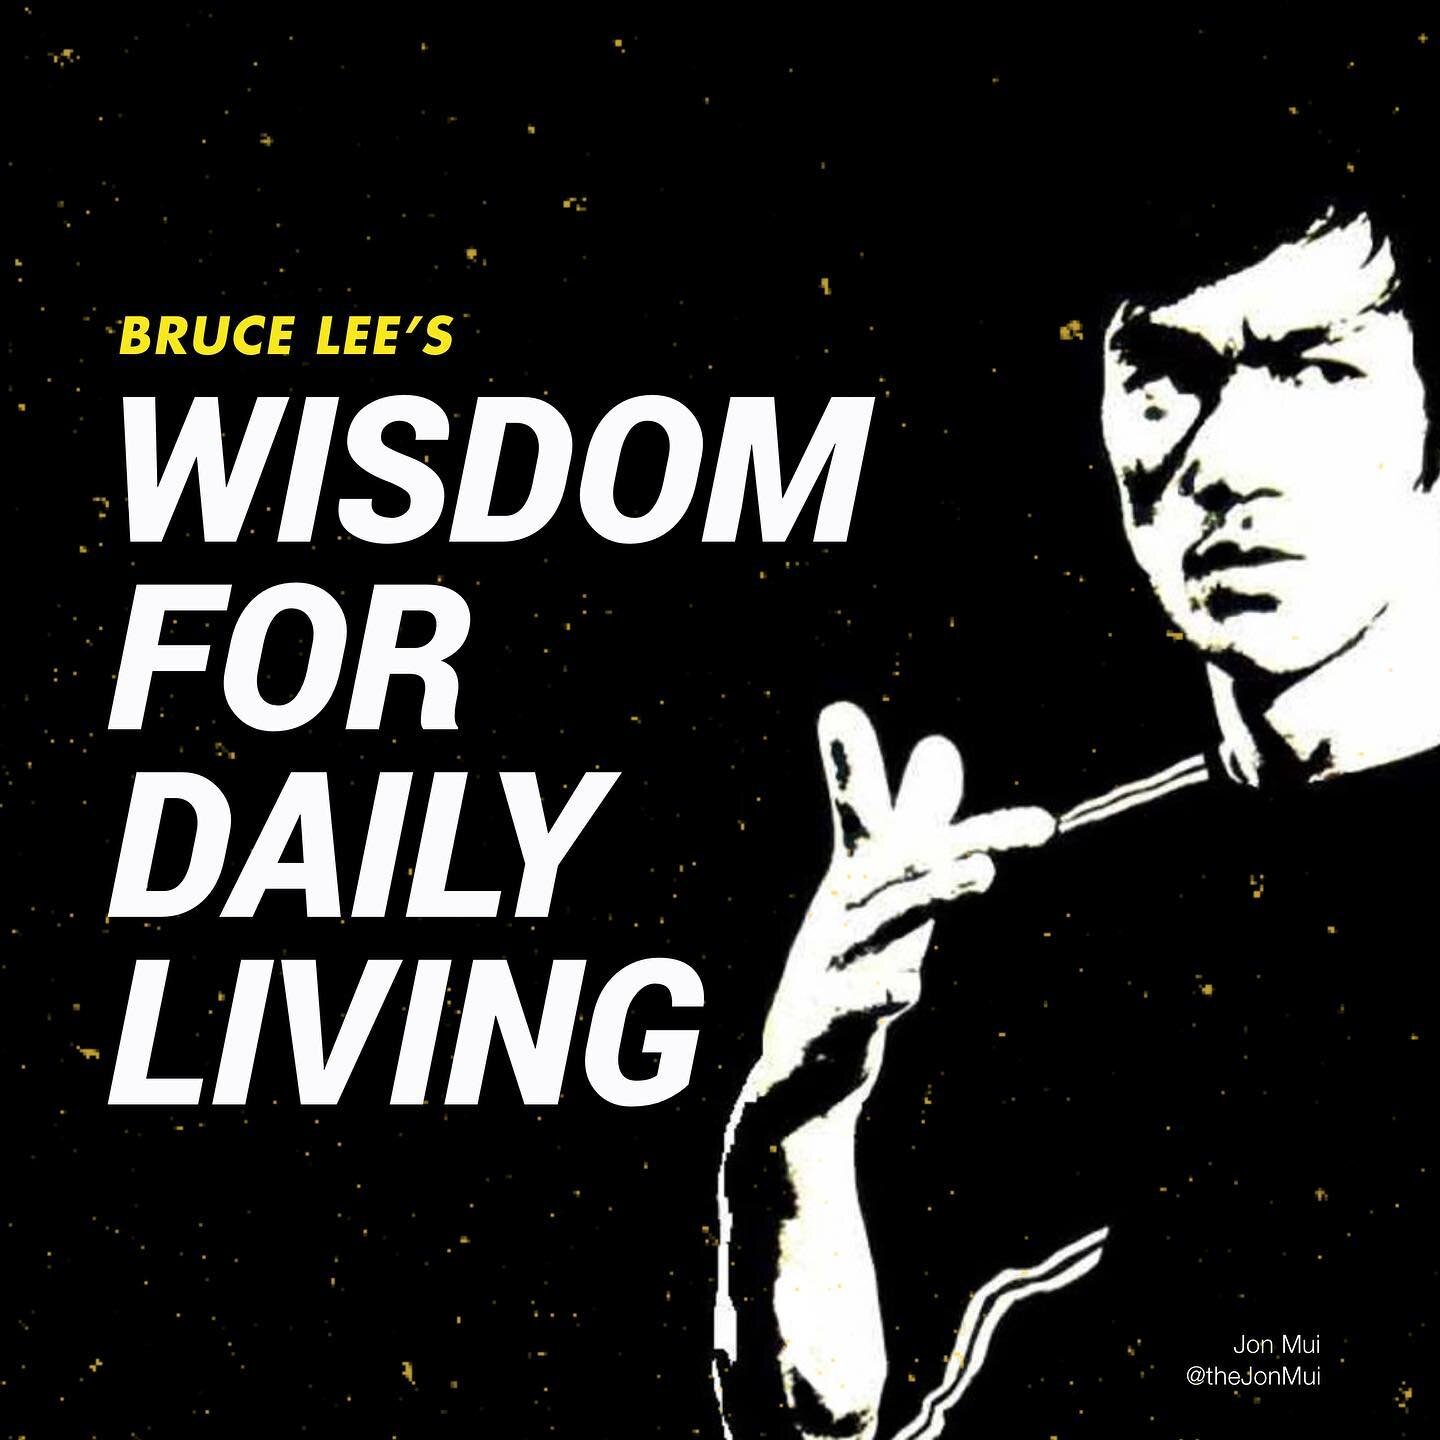 With Bruce Lee's birthday a month away,⁣⁣
⁣⁣
I wanted to share some timeless 💫 passages.⁣⁣
⁣⁣
Not a lot of books go right into the good bits,⁣⁣
⁣⁣
but this one definitely doesn't disappoint.⁣⁣
⁣⁣
It's loaded with tons of direct quotes;⁣⁣
⁣⁣
so, pick